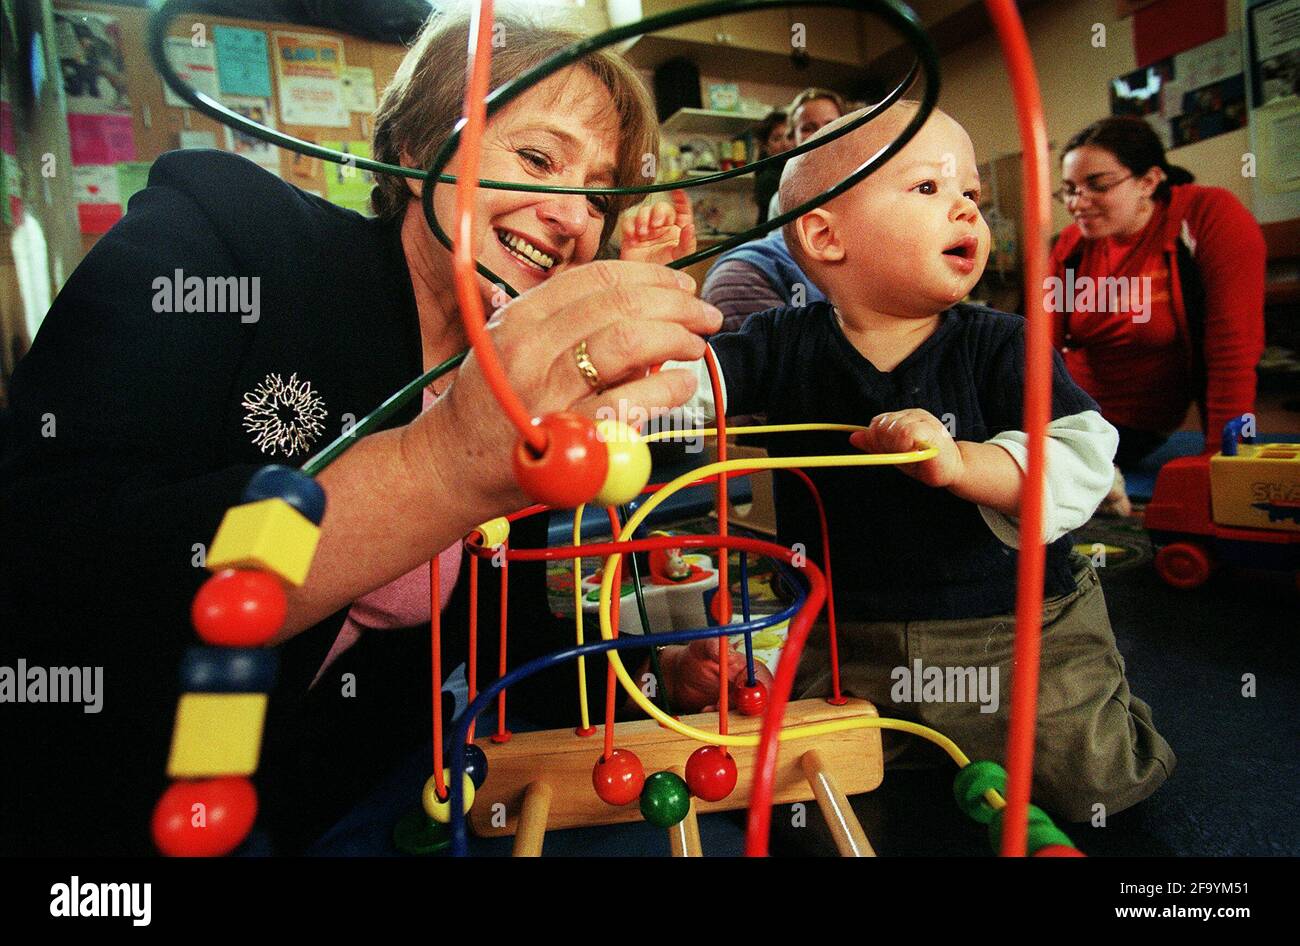 MARGARET HODGE PLAYS WITH IAN WHITEFORD FEB 2001 AT THE TOY LIBRARY IN PIMLICO. Stock Photo